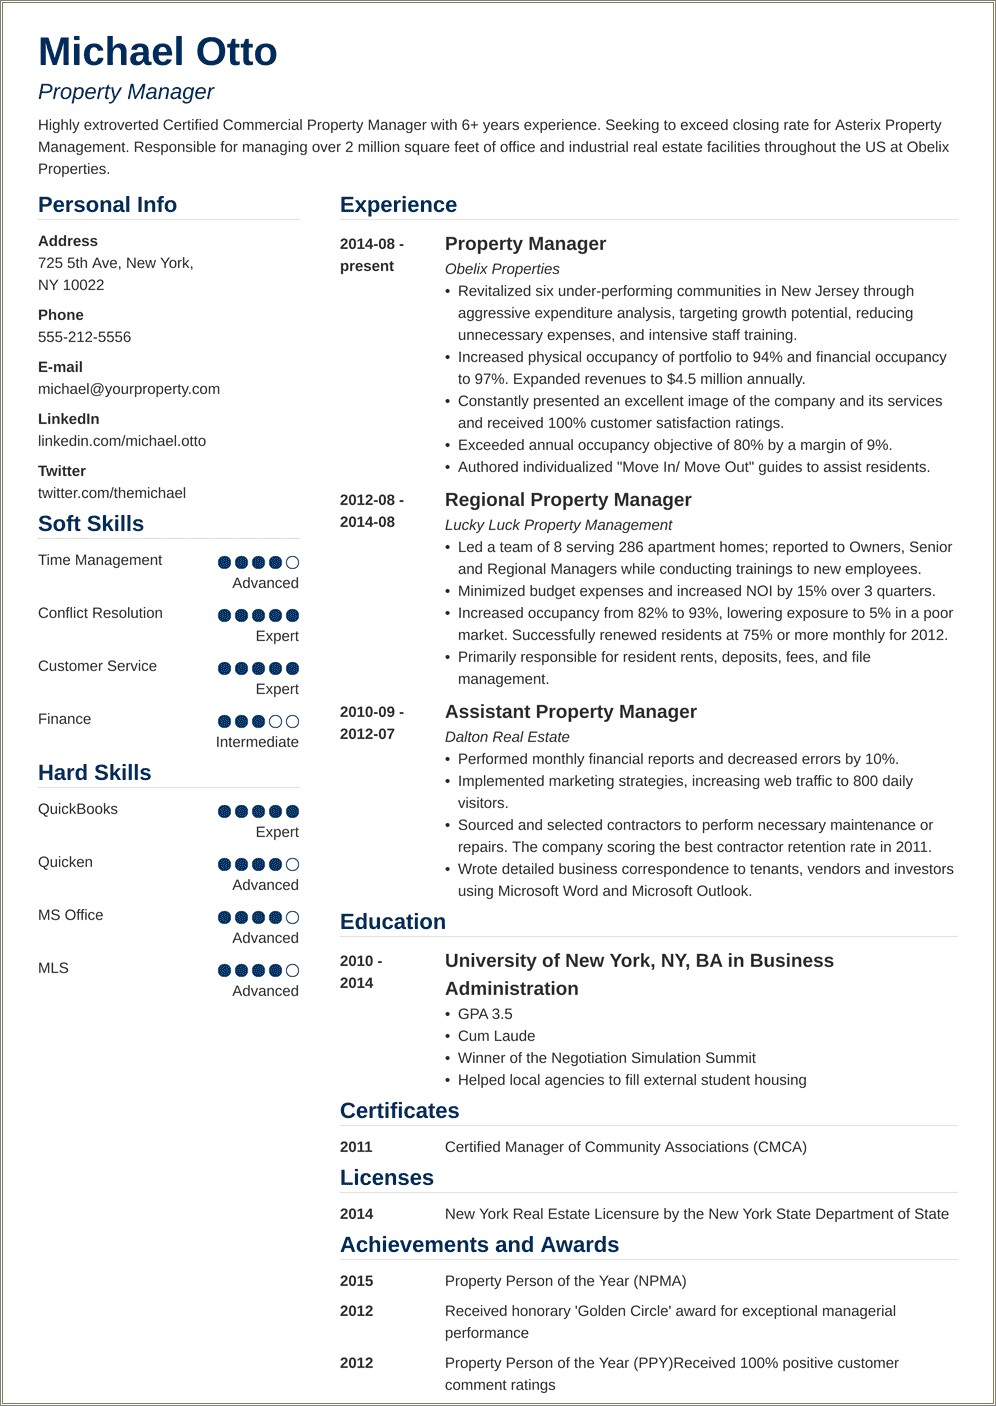 Property Management Professional Summery For Resume